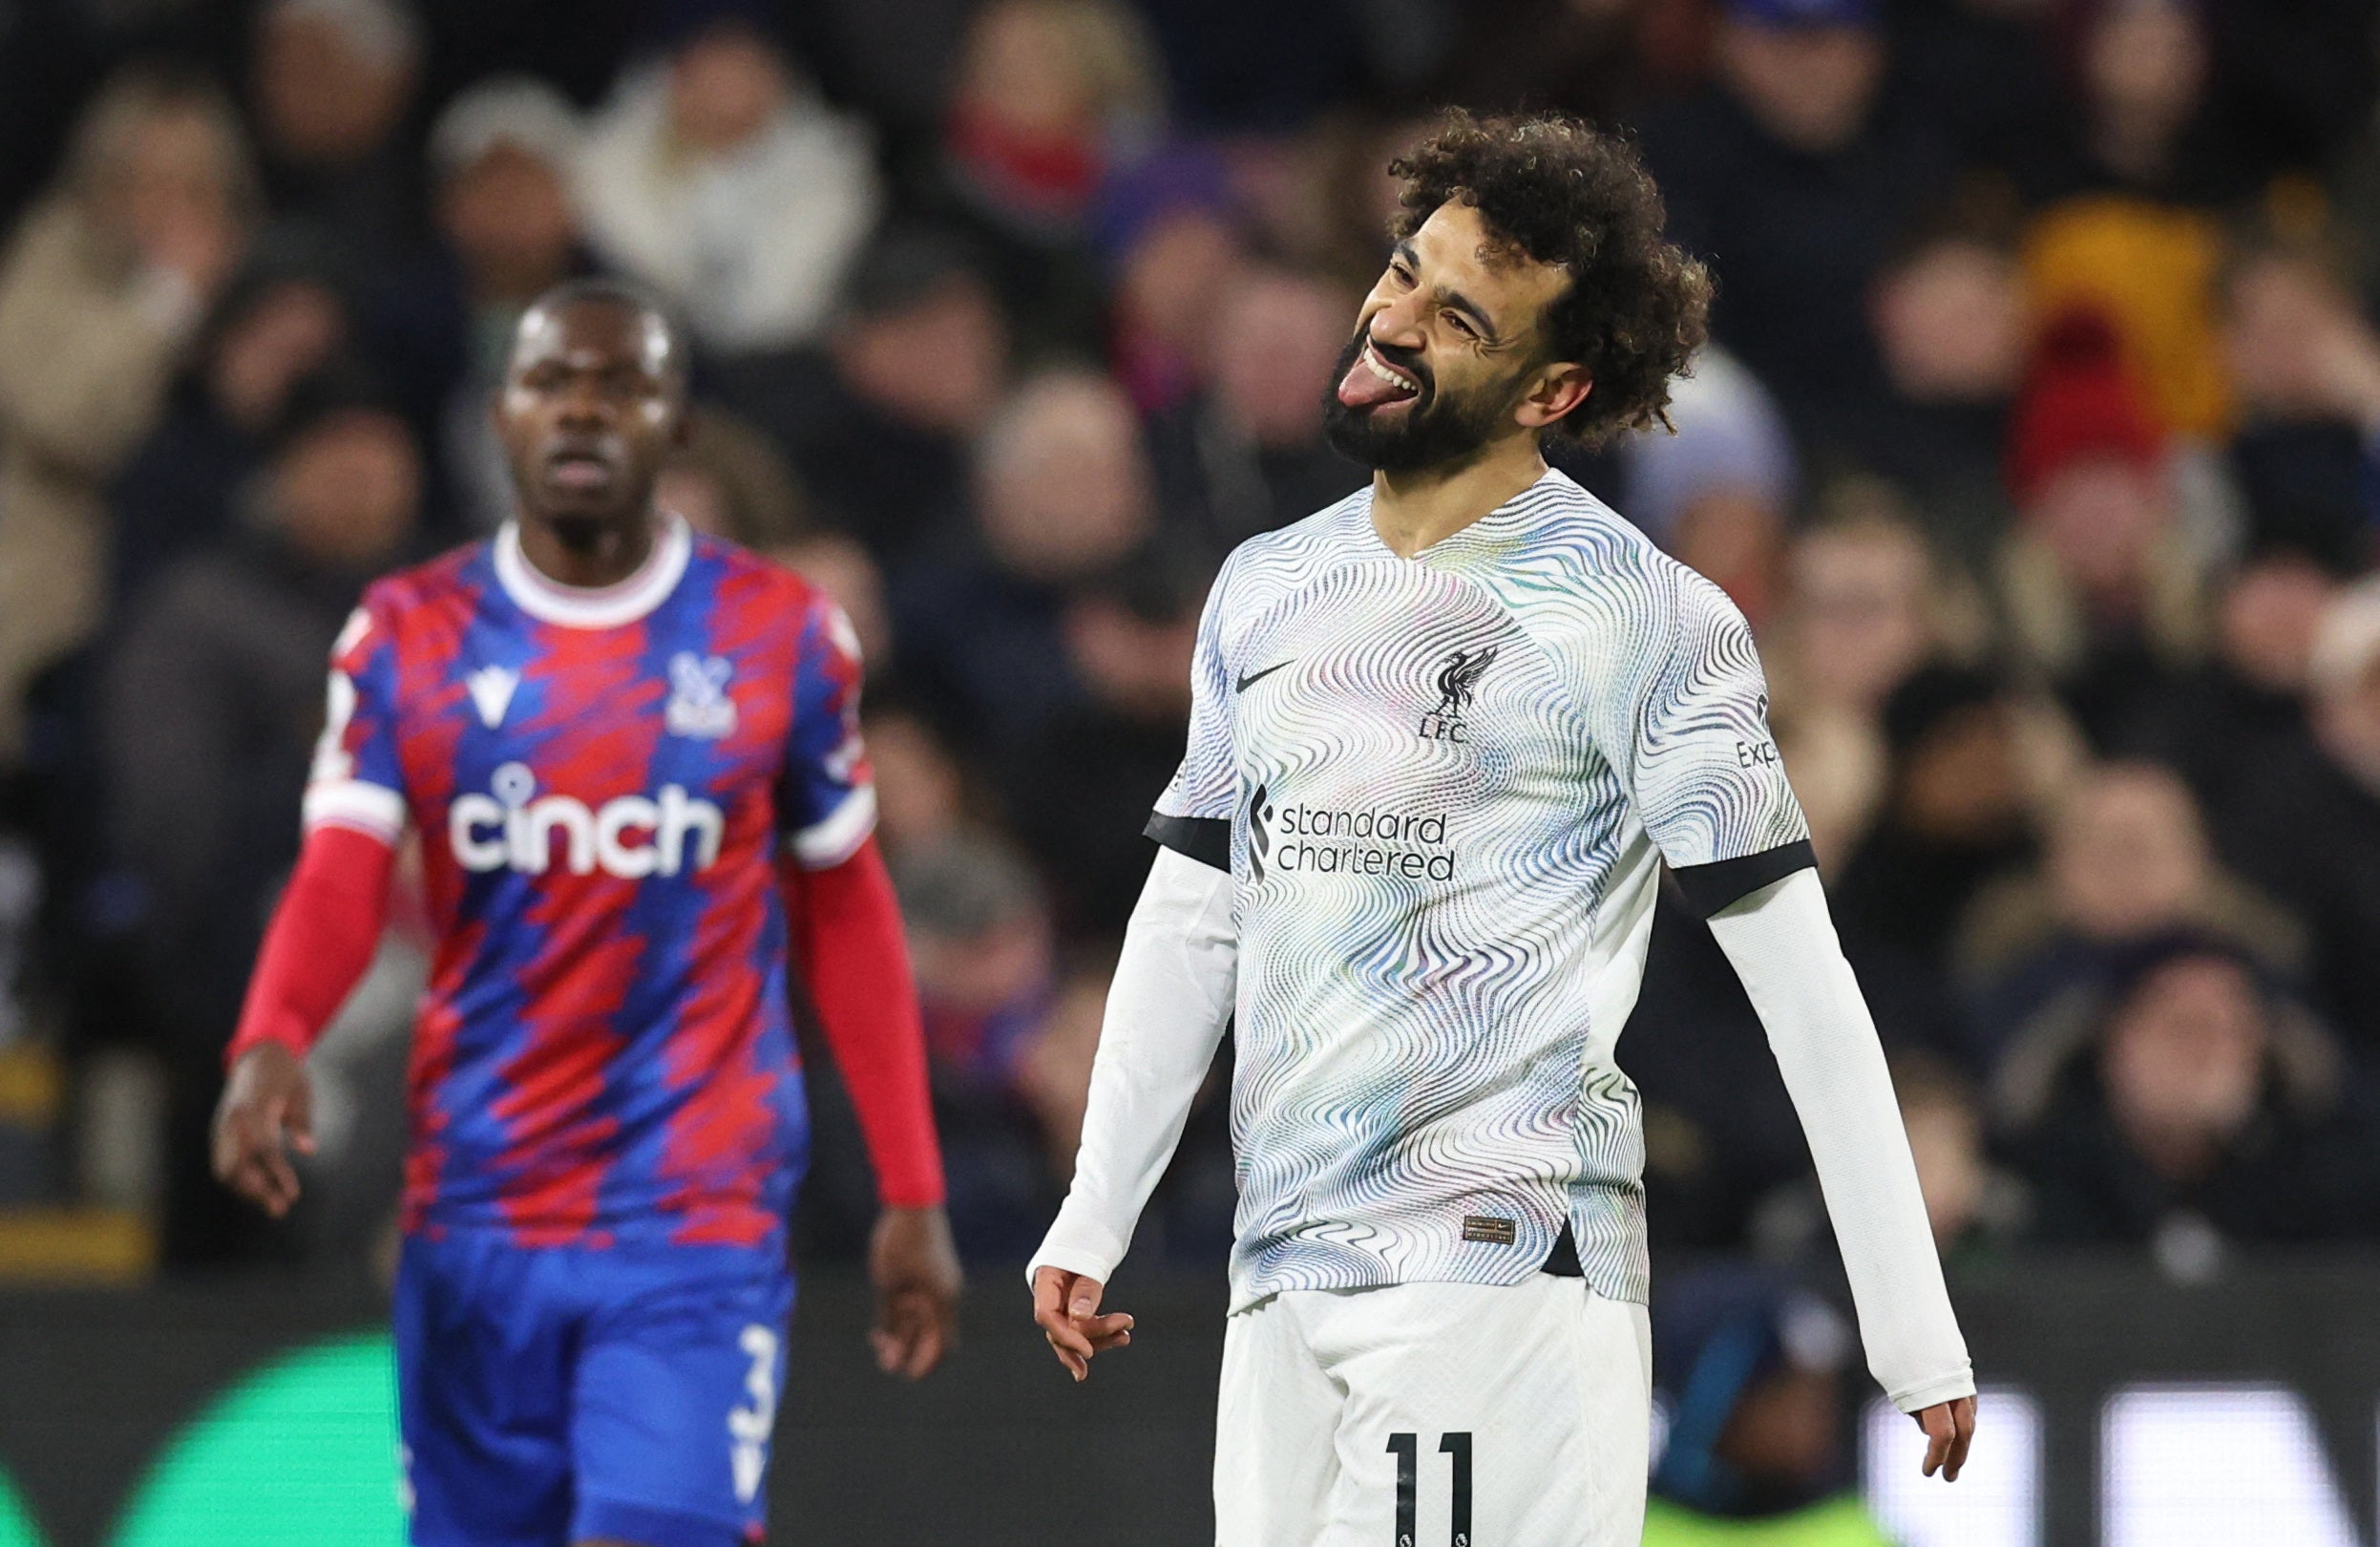 Liverpool couldn’t find the touch of quality needed to beat Crystal Palace